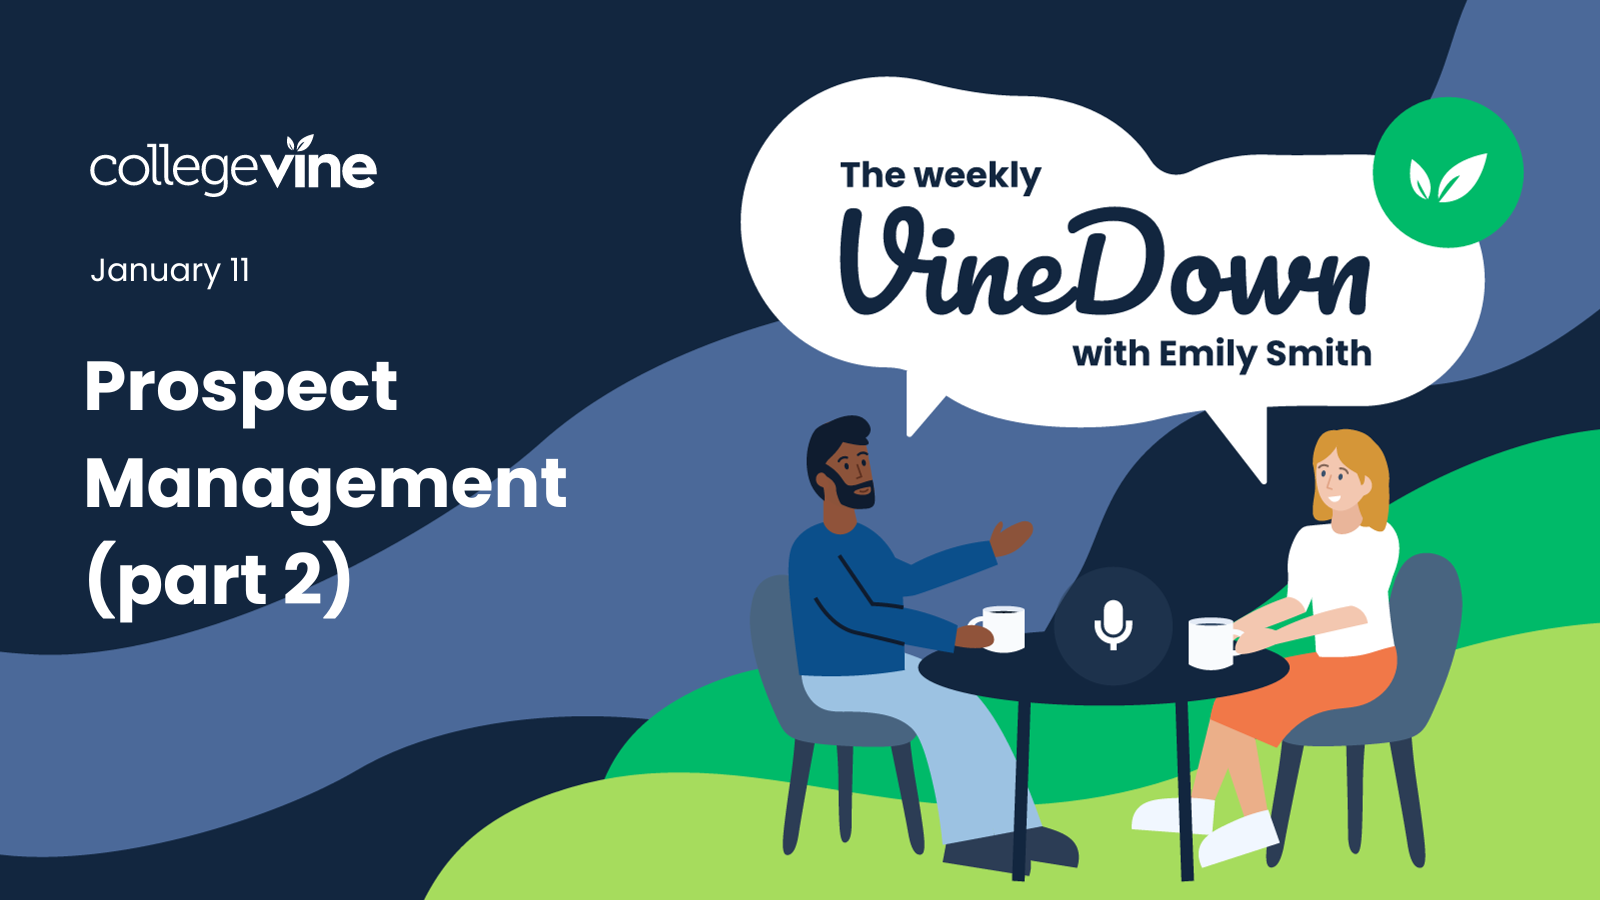 The Weekly VineDown Professional Development Series: Prospect Management